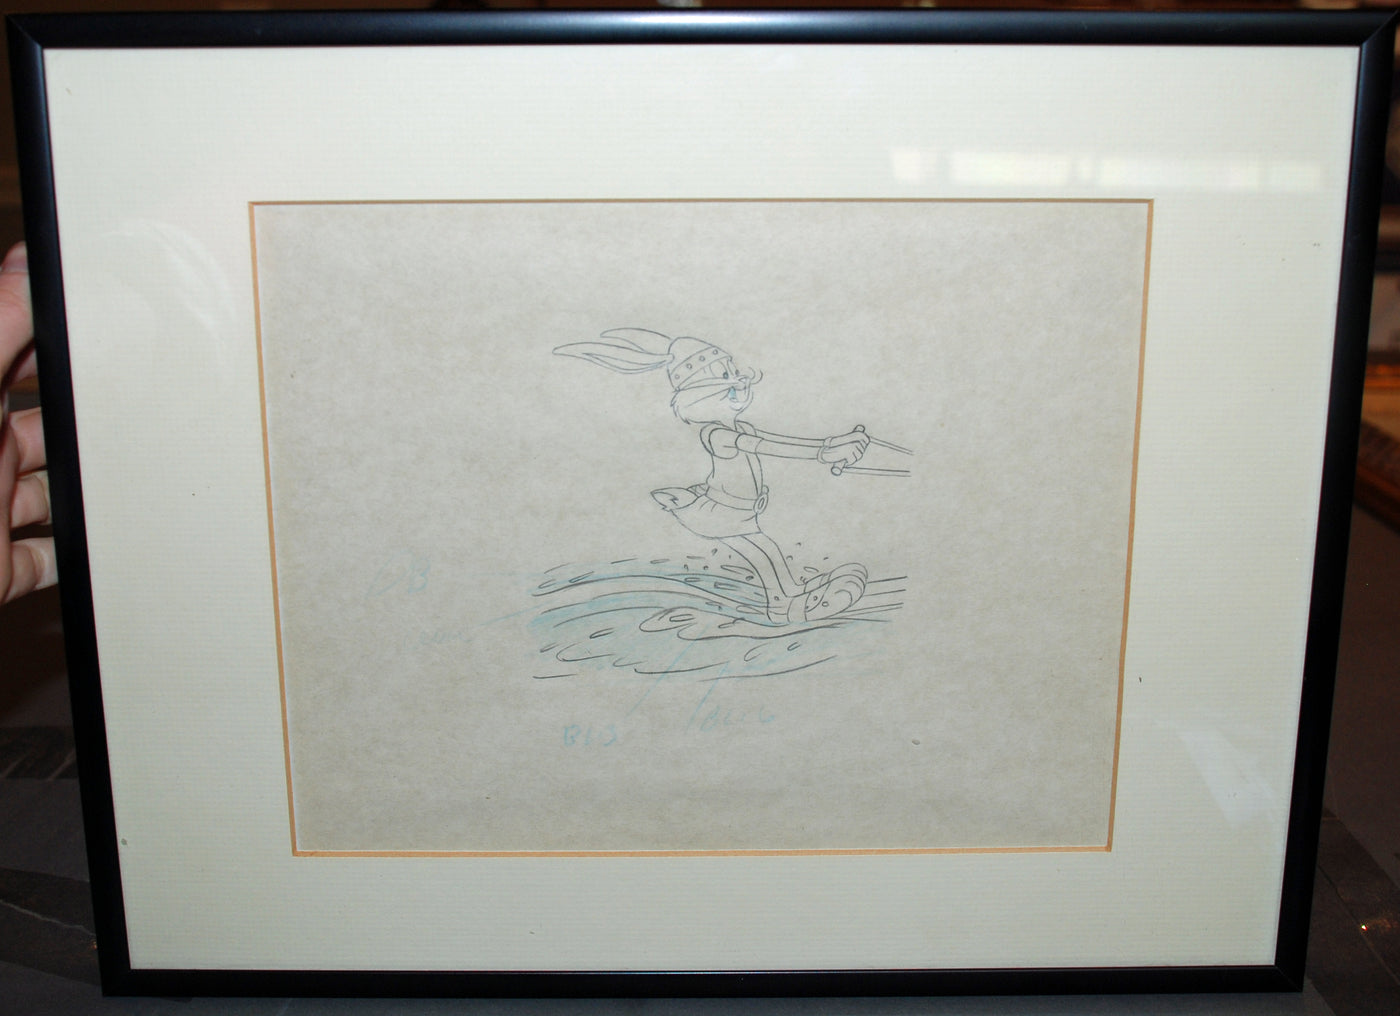 Original Production Drawing From 1970s TV Commercial Featuring Bugs Bunny